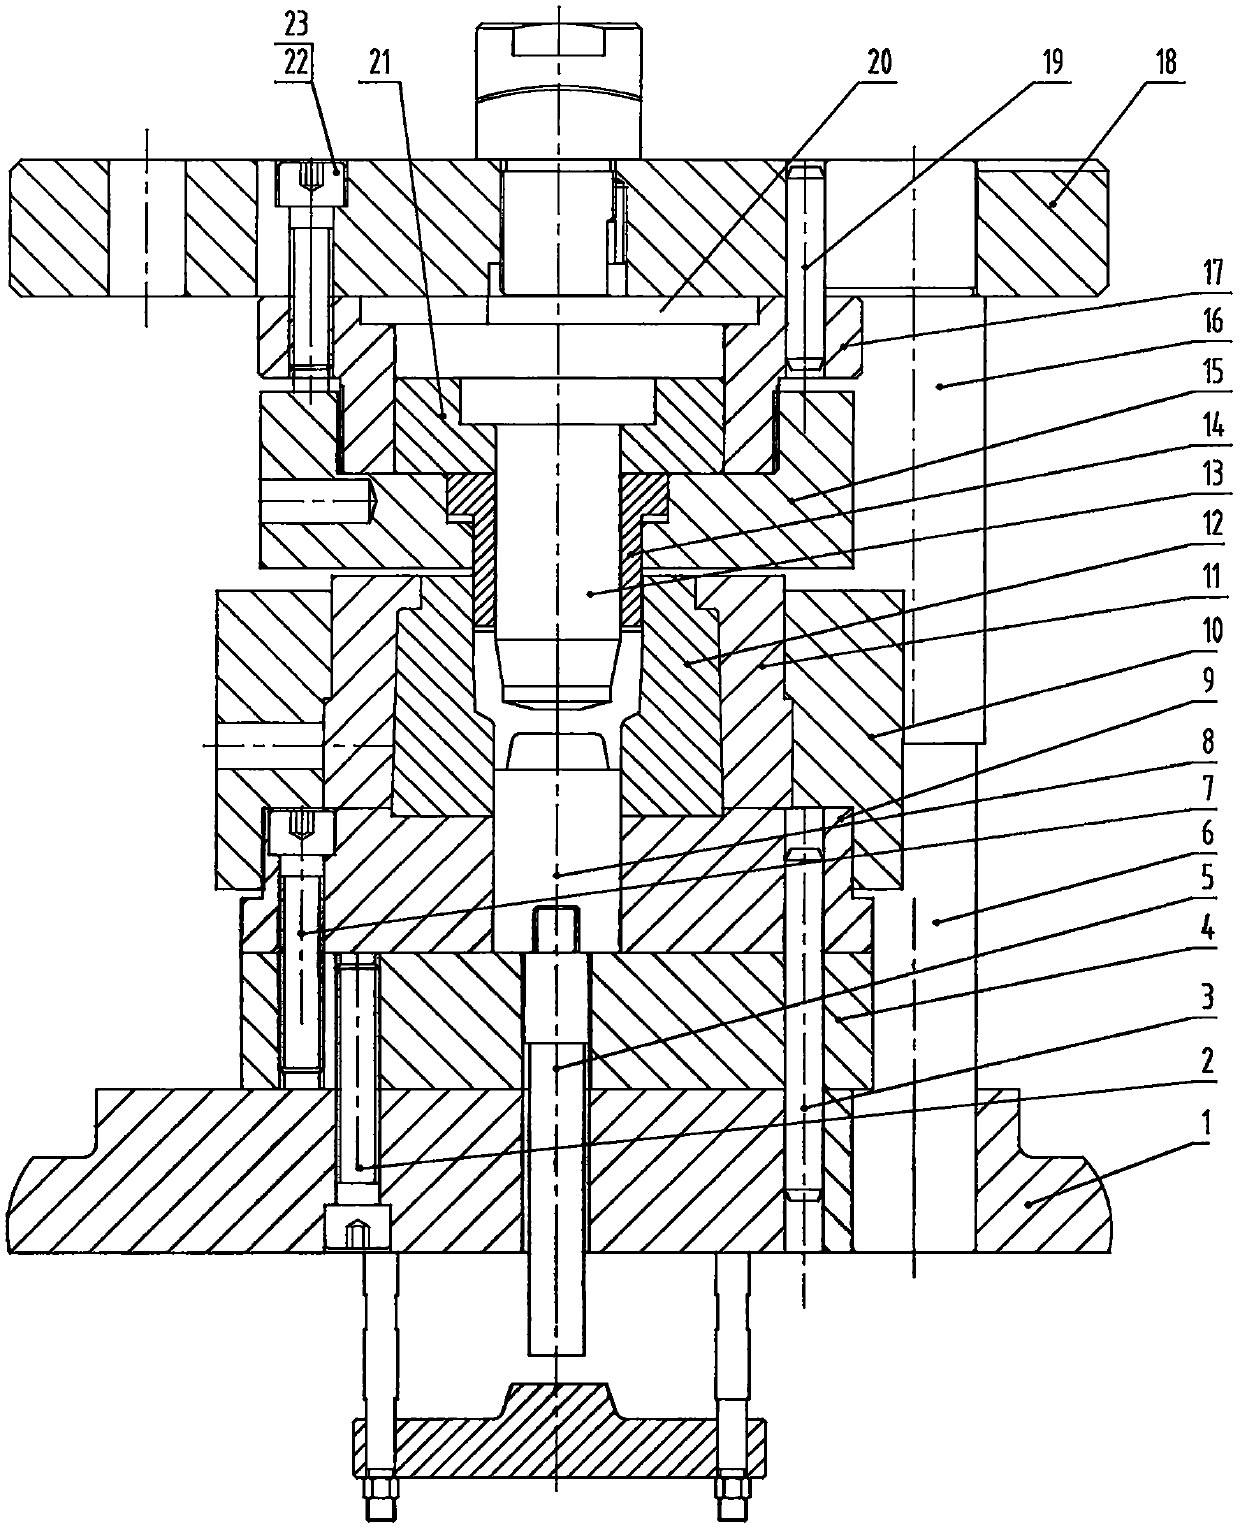 A Synchronous Extrusion Forming Method for "h" Shape Connectors Made of Steel with Different Wall Thickness